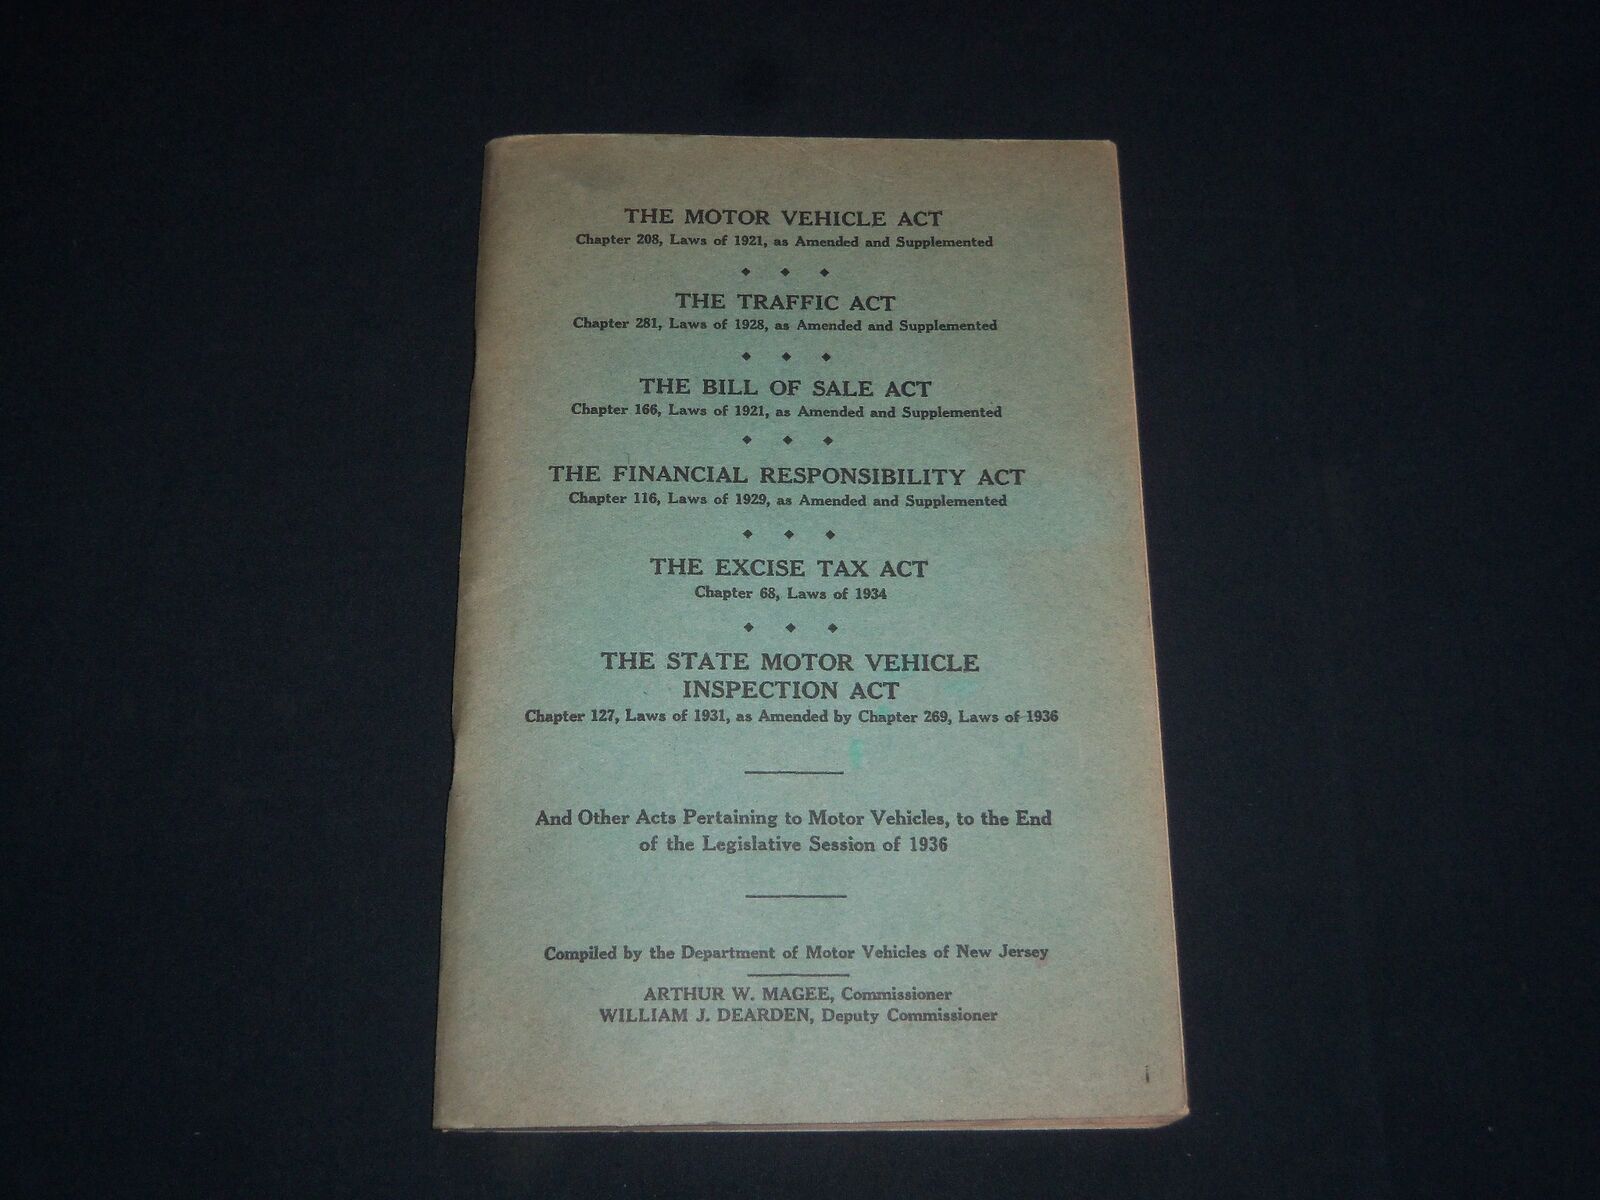 1936 NEW JERSEY MOTOR VEHICLE ACTS SOFTCOVER BOOK BY NJ DMV - MAGEE - J 3983